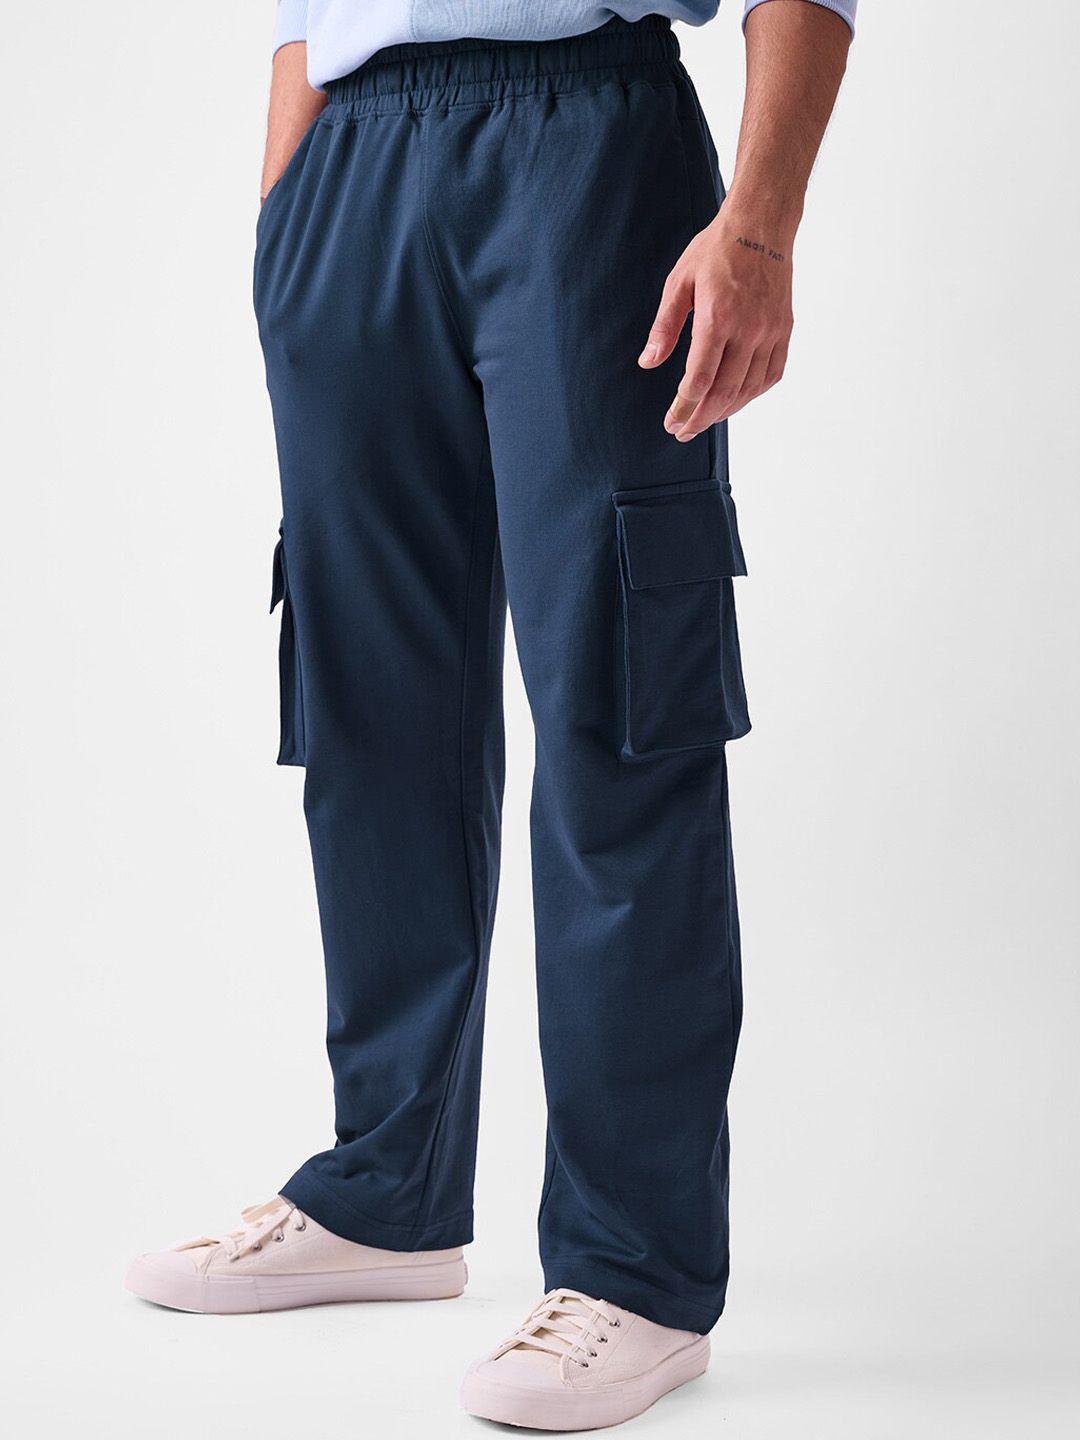 the-souled-store-blue-men-mid-rise-cargos